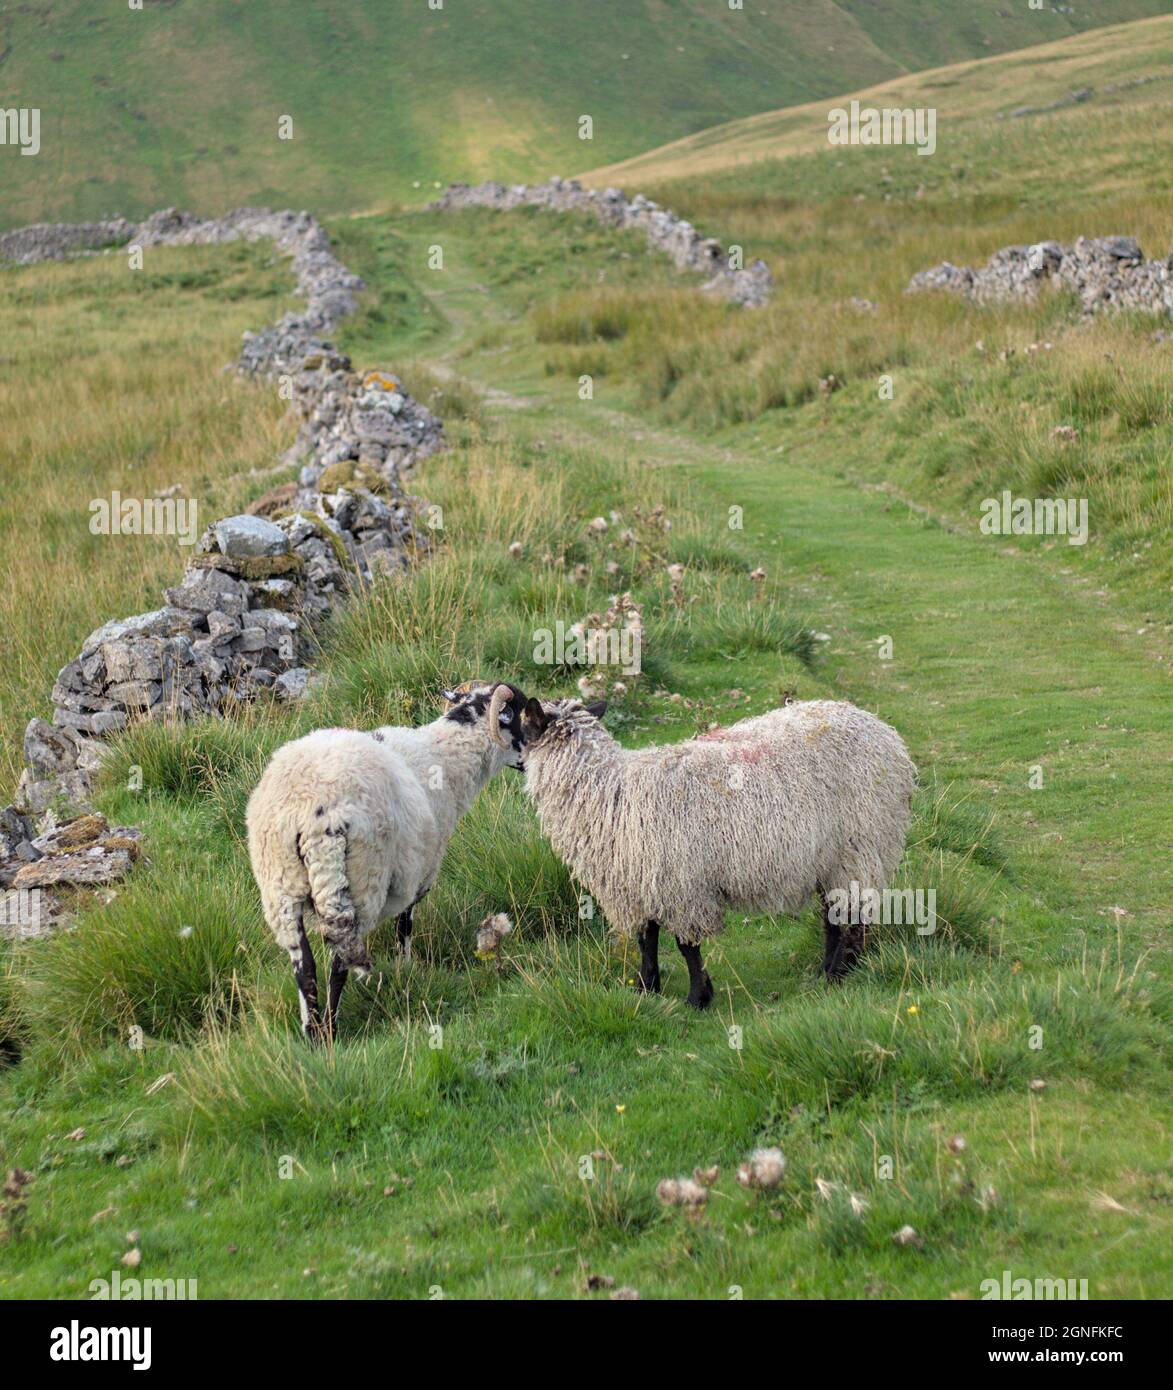 sheep on Starbotton Cam Road nr Sandy Gate Wharfedale Craven Yorkshire Dales NP Stock Photo